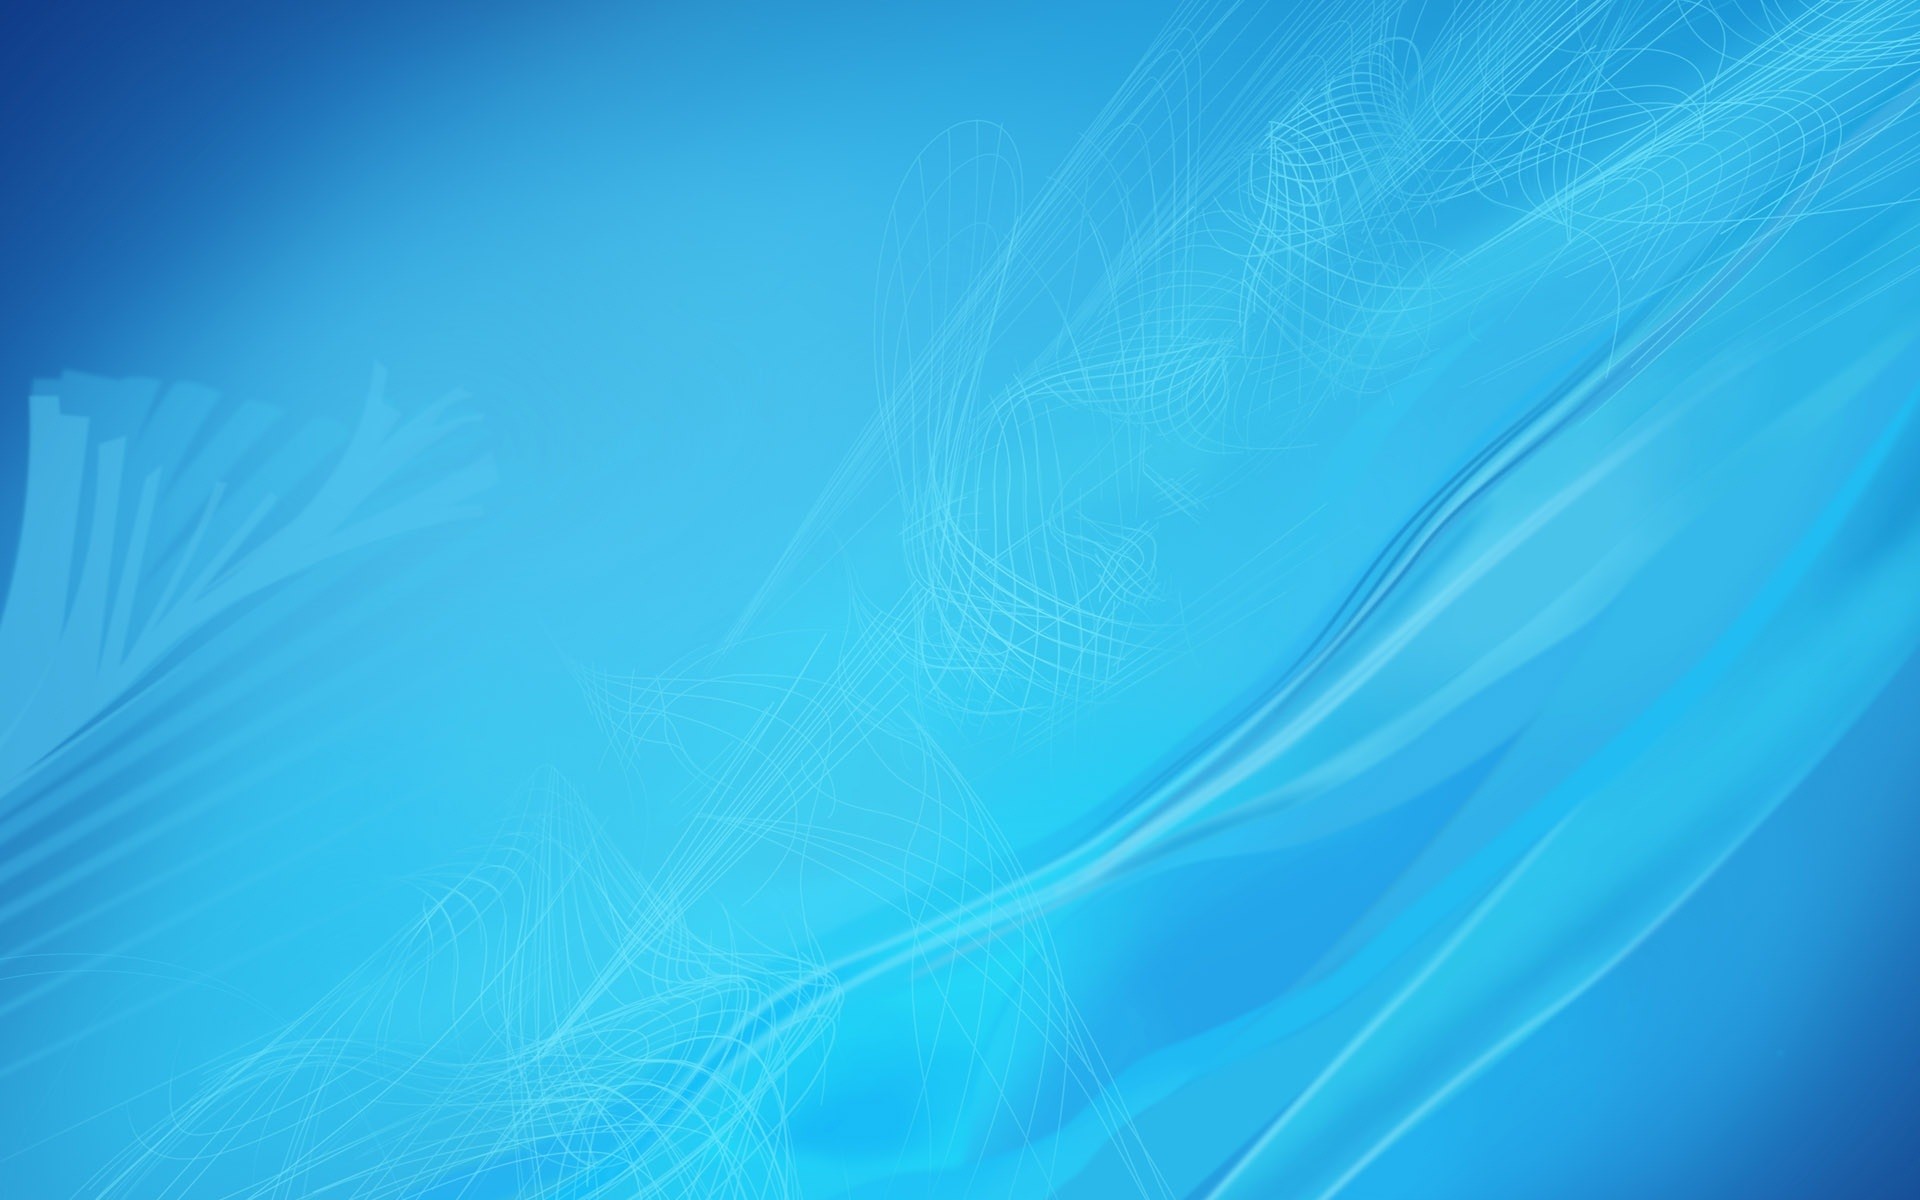 1920x1200, Blue Abstract Wallpaper 
 Data Id 172228 - Abstract Blue Hd Background - HD Wallpaper 